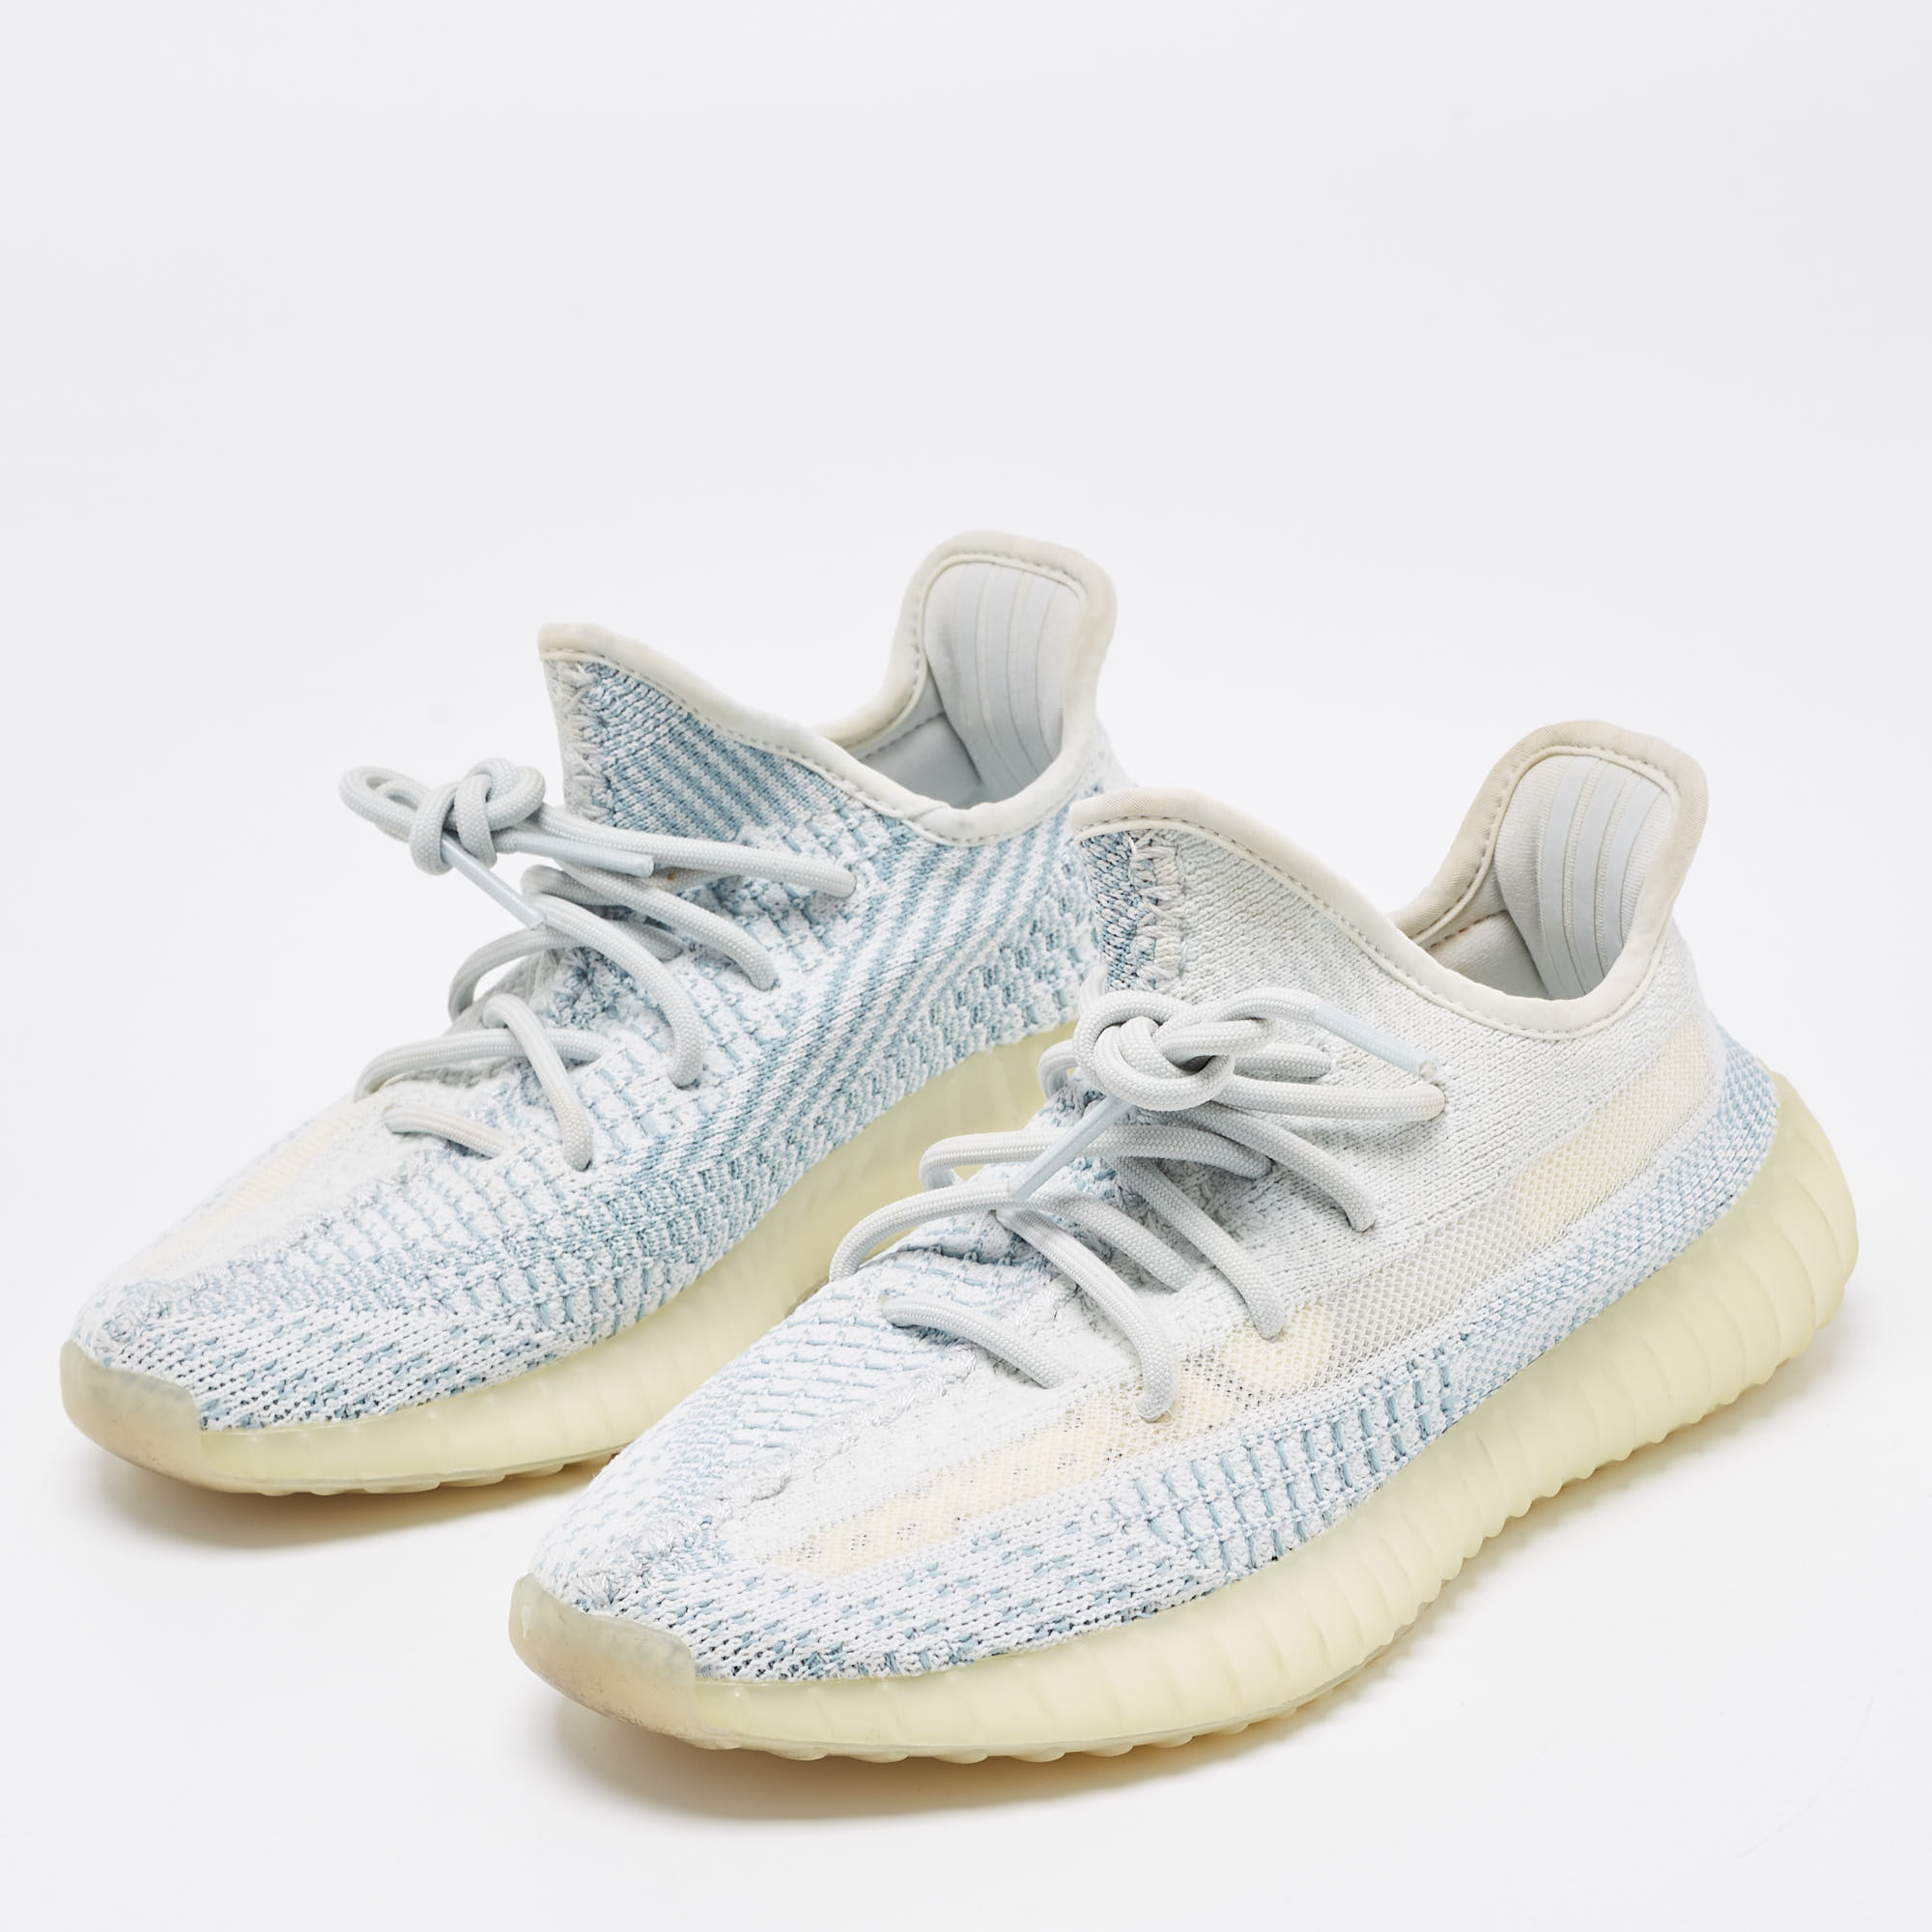 

Yeezy x Adidas Blue/White Knit Fabric Boost 350 V2 Cloud White Non-Reflective Sneakers Size  1/3